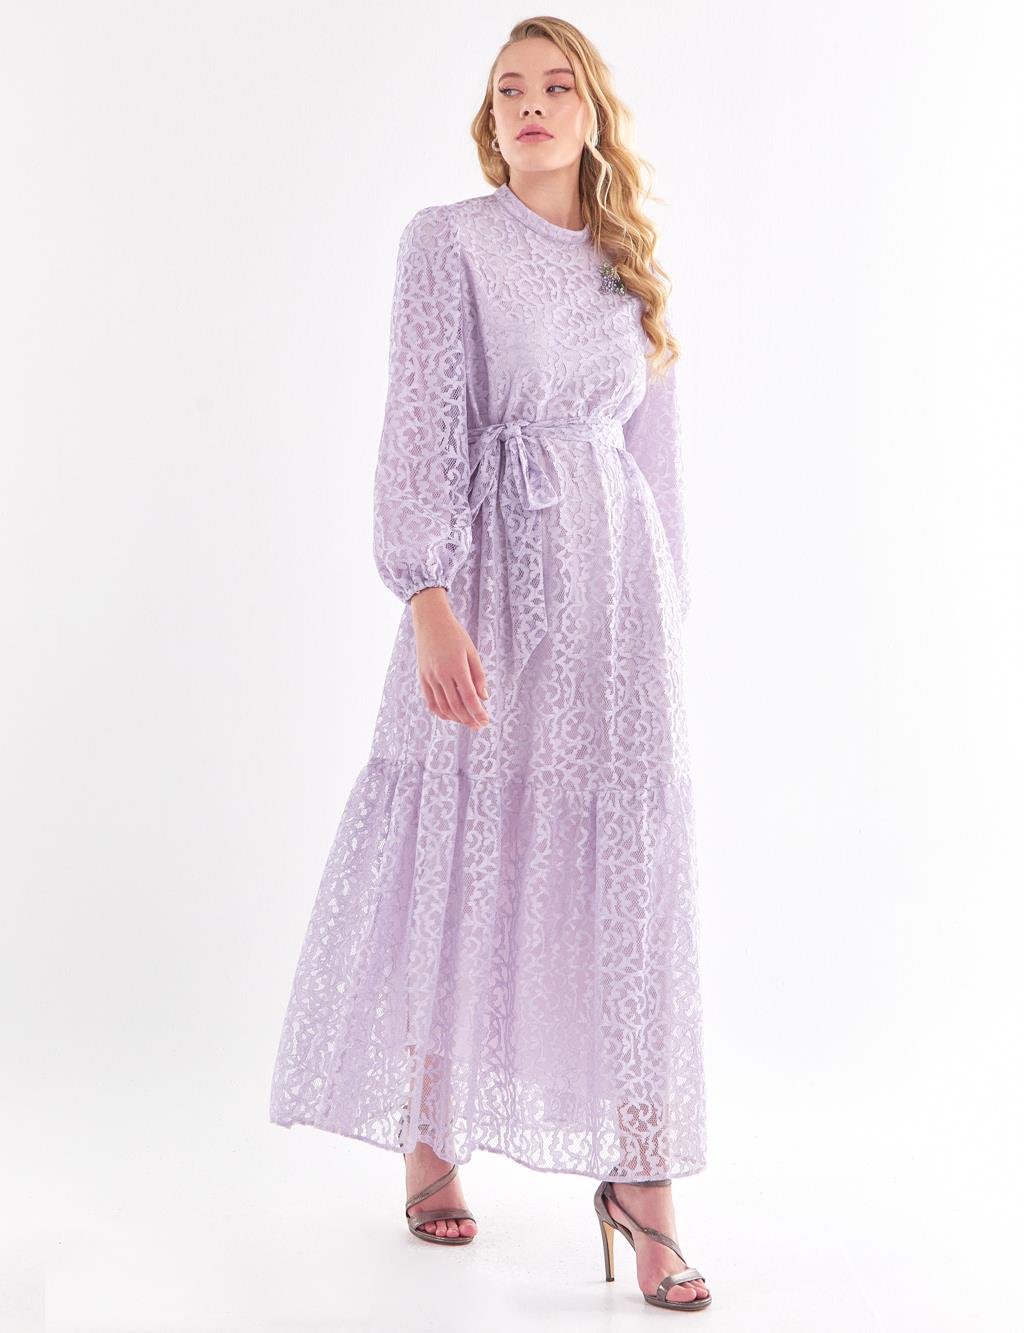 Belted Lace Dress Lilac